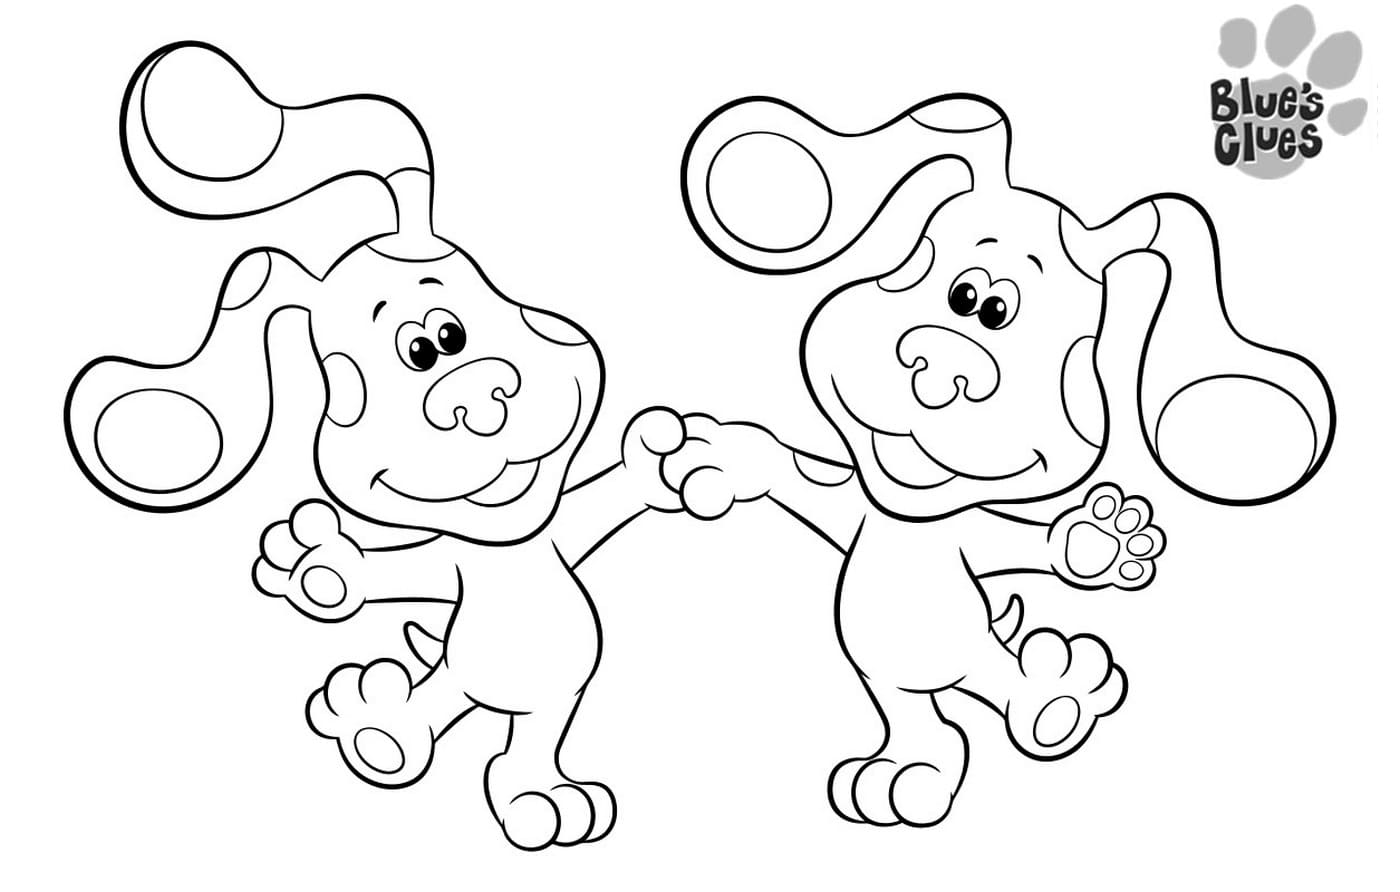 Blues Clues Coloring Page Free coloring pages for Kids